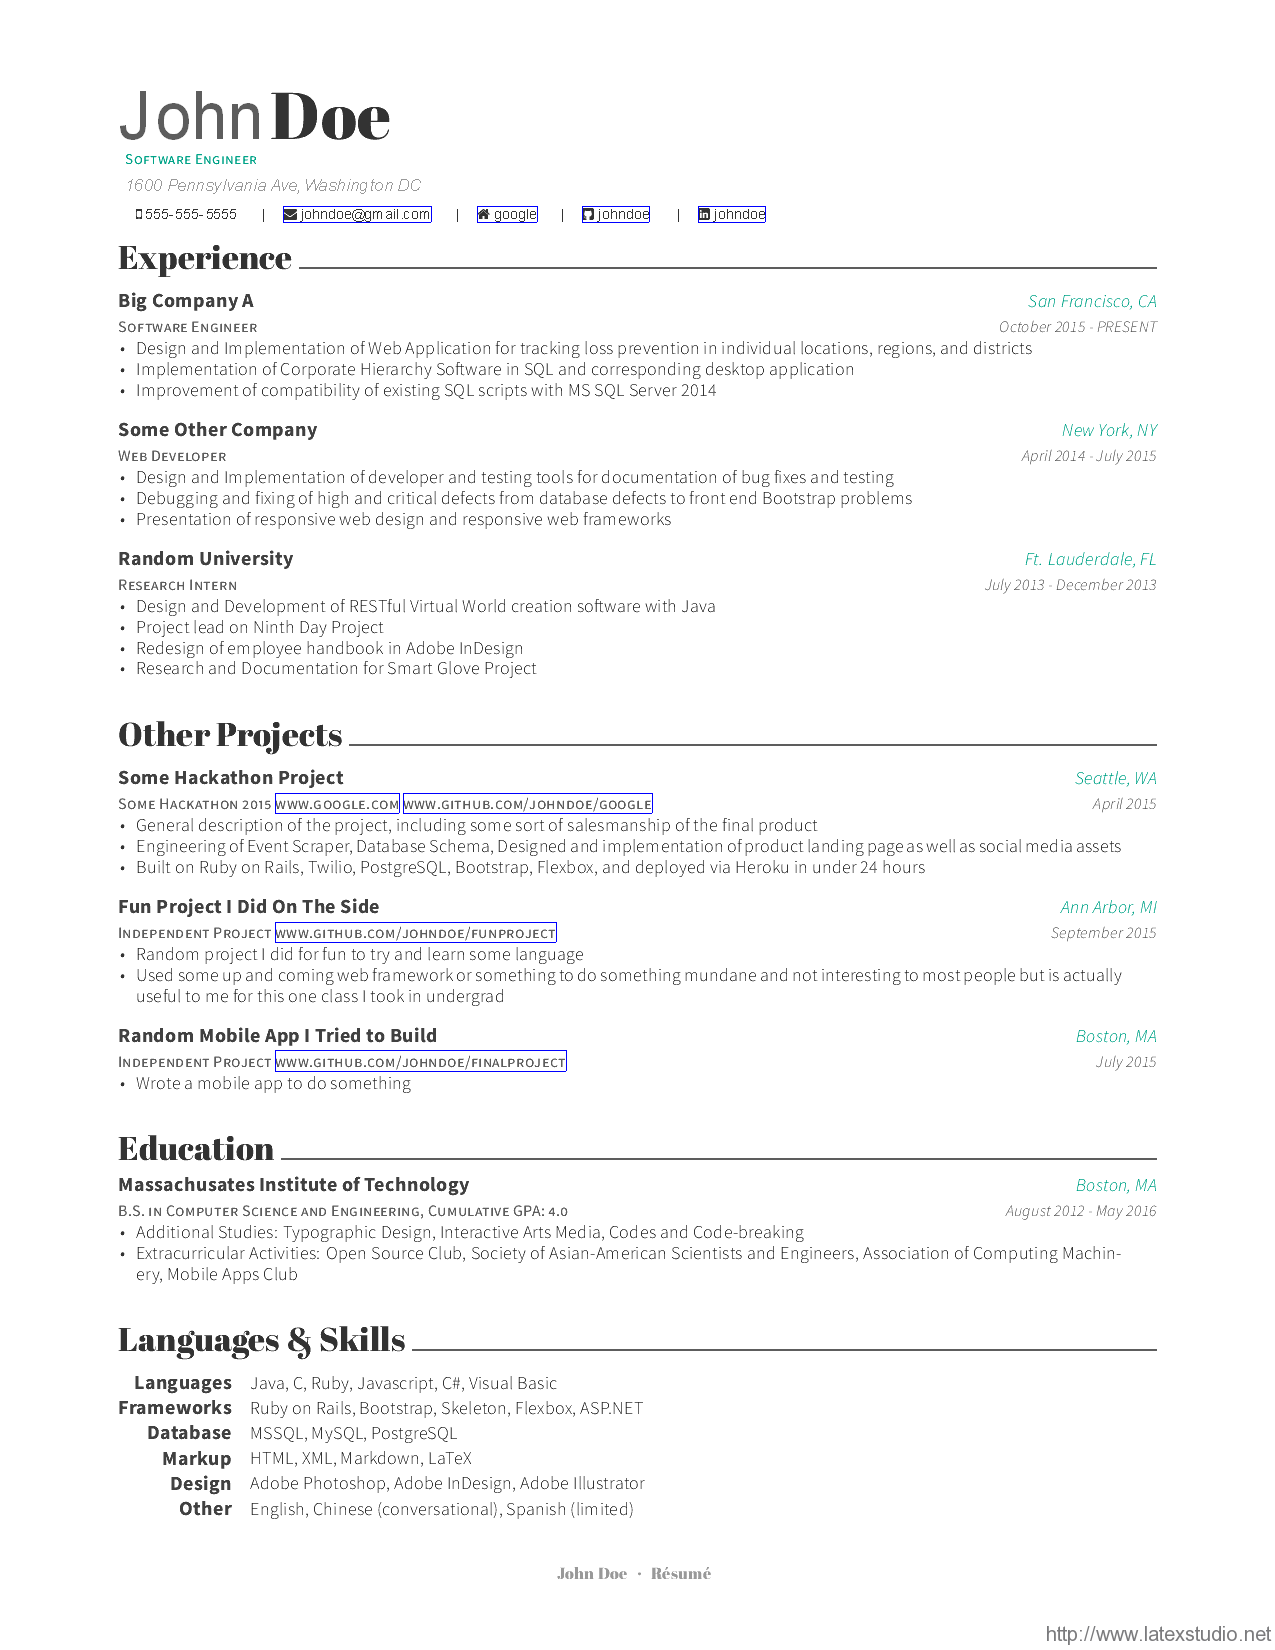 resume-page-001